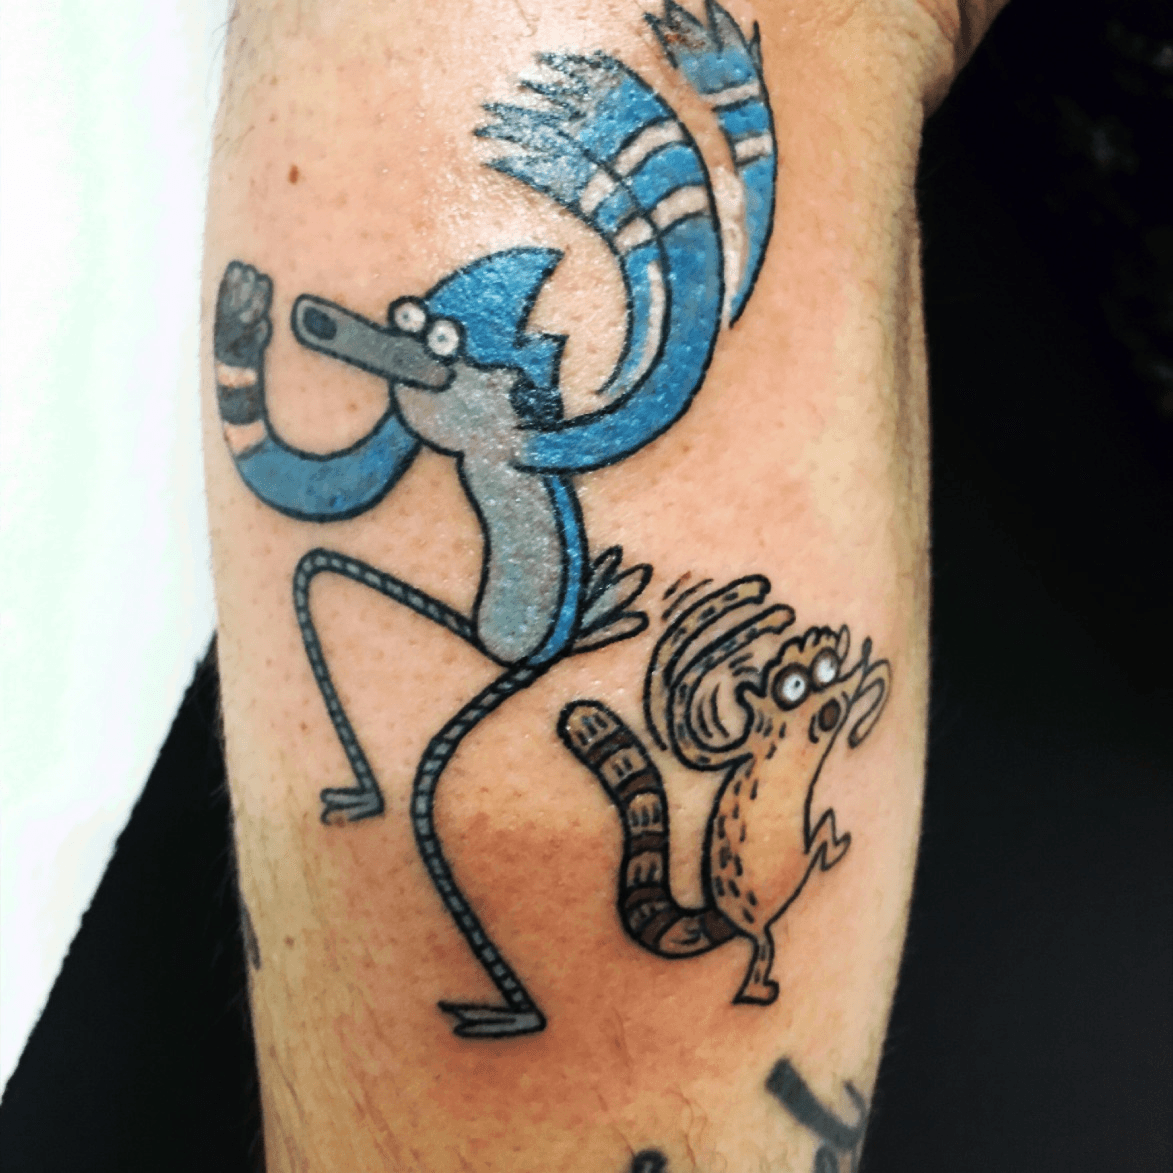 Rigby and Mordie gamin Really fun color tattoo Regular Show    Tattoos Color tattoo Cartoon tattoos